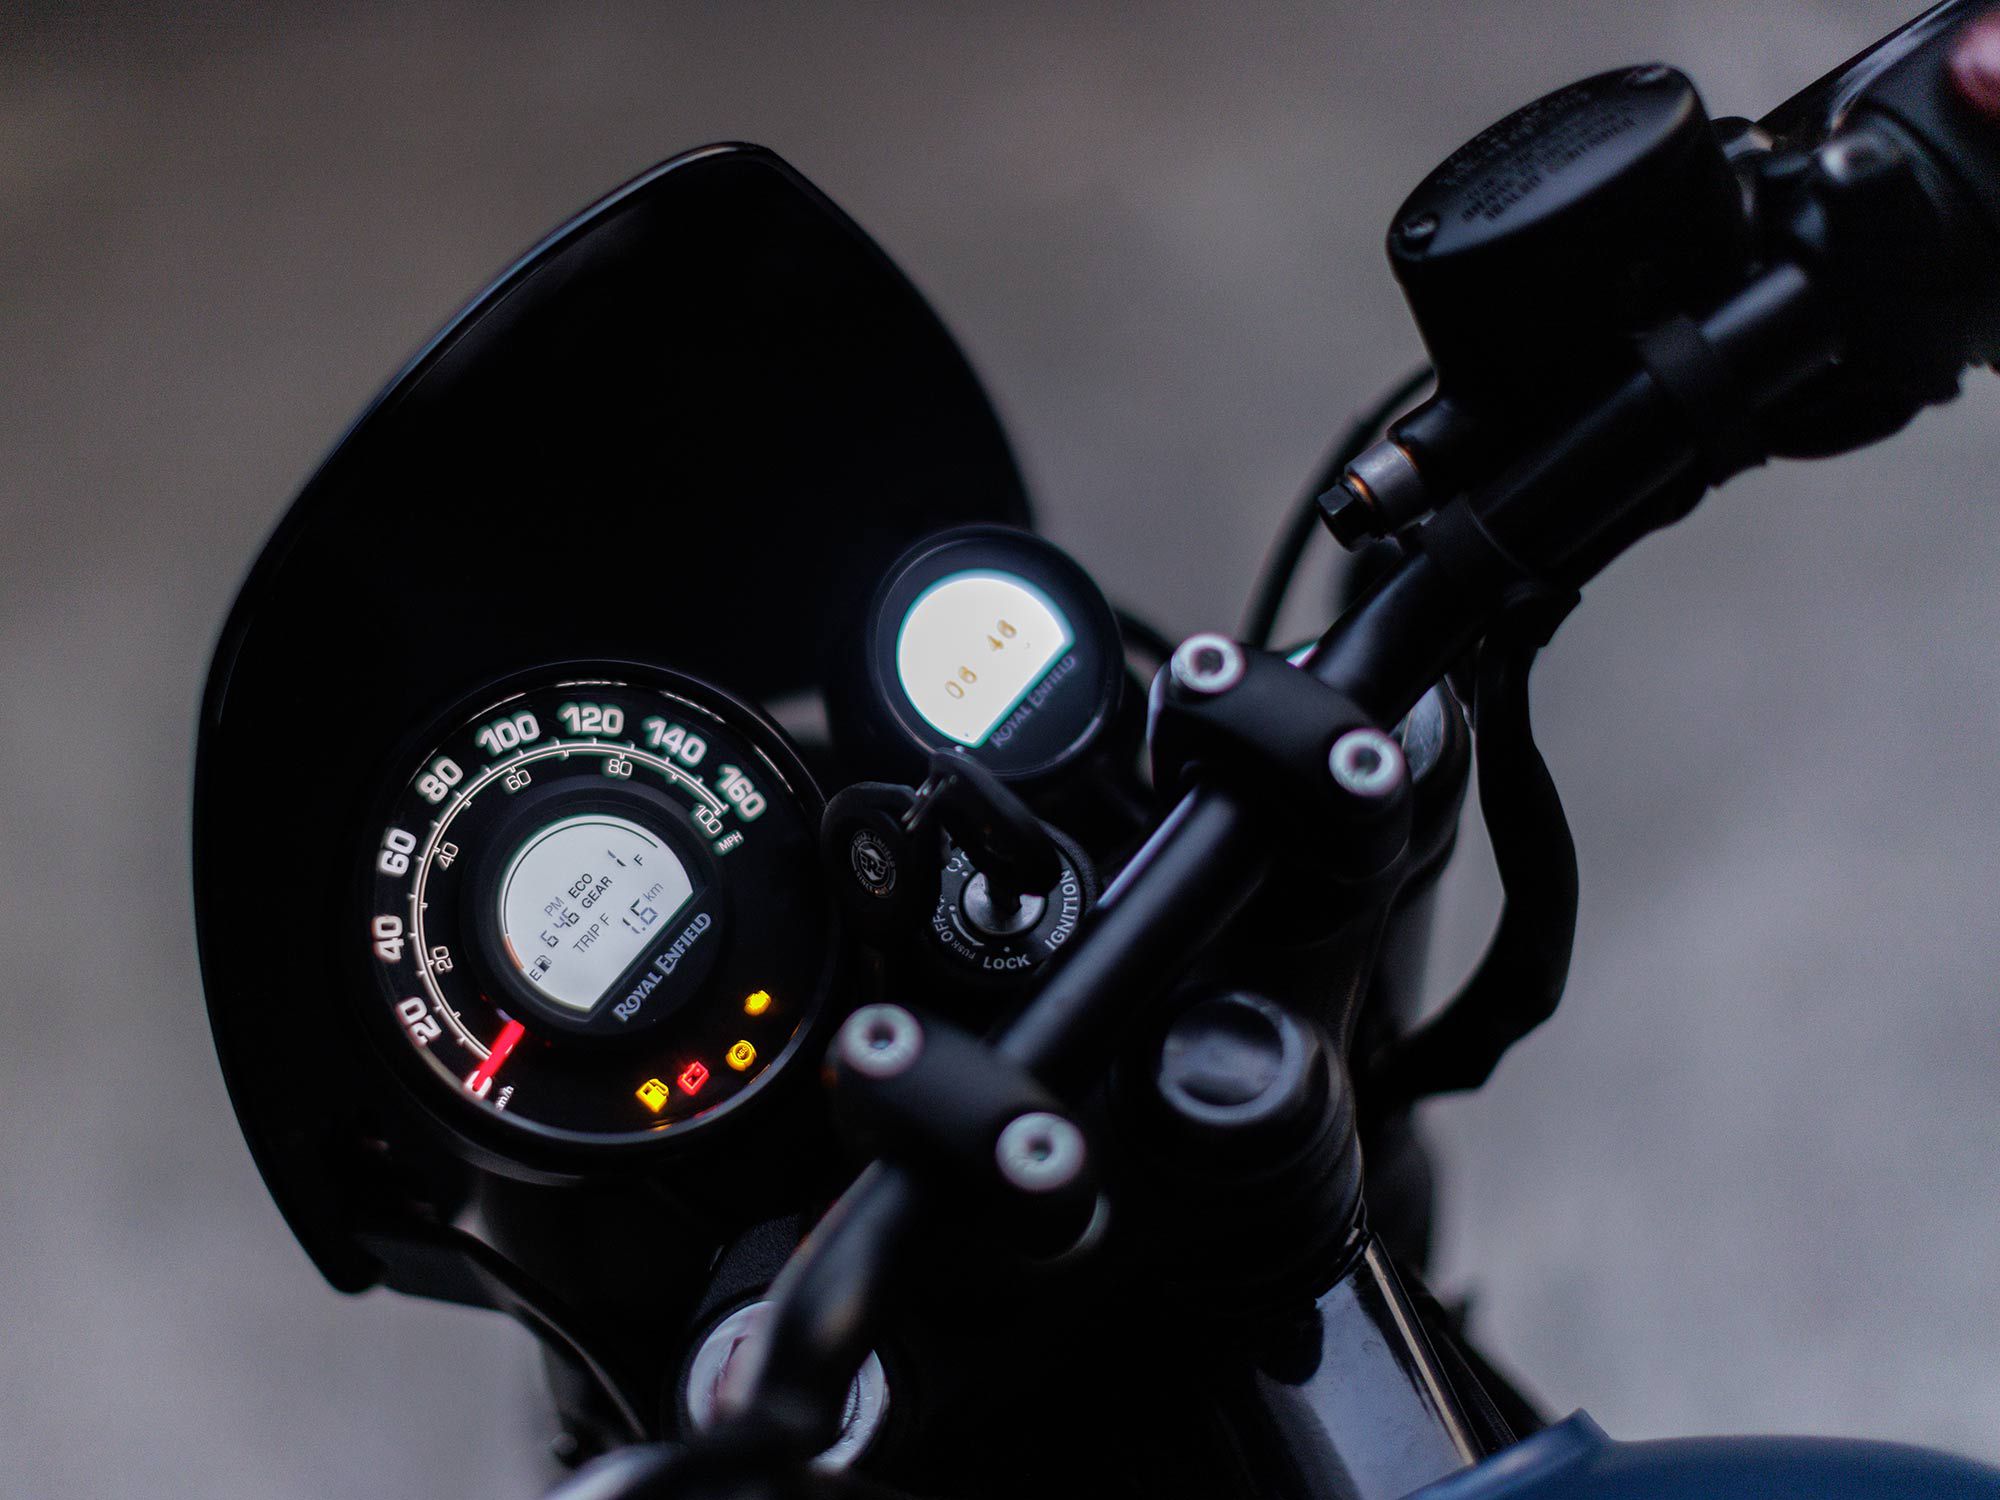 A mix of digital and analog instrumentation adorn the Hunter’s handlebars, though the navigation system on the right is an aftermarket accessory.